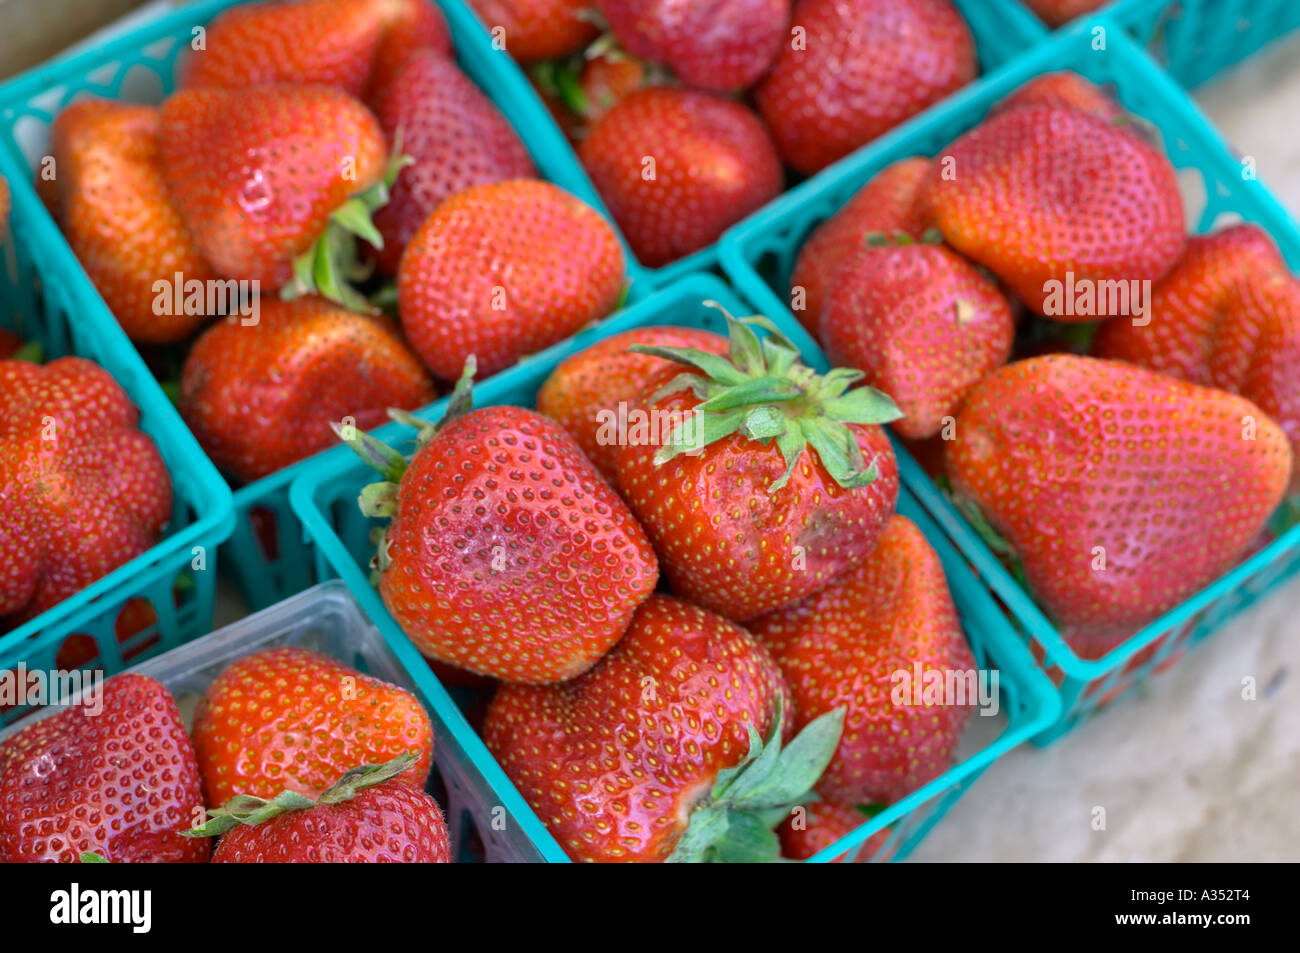 Fresh strawberries in plastic baskets, close-up at the market. Stock Photo